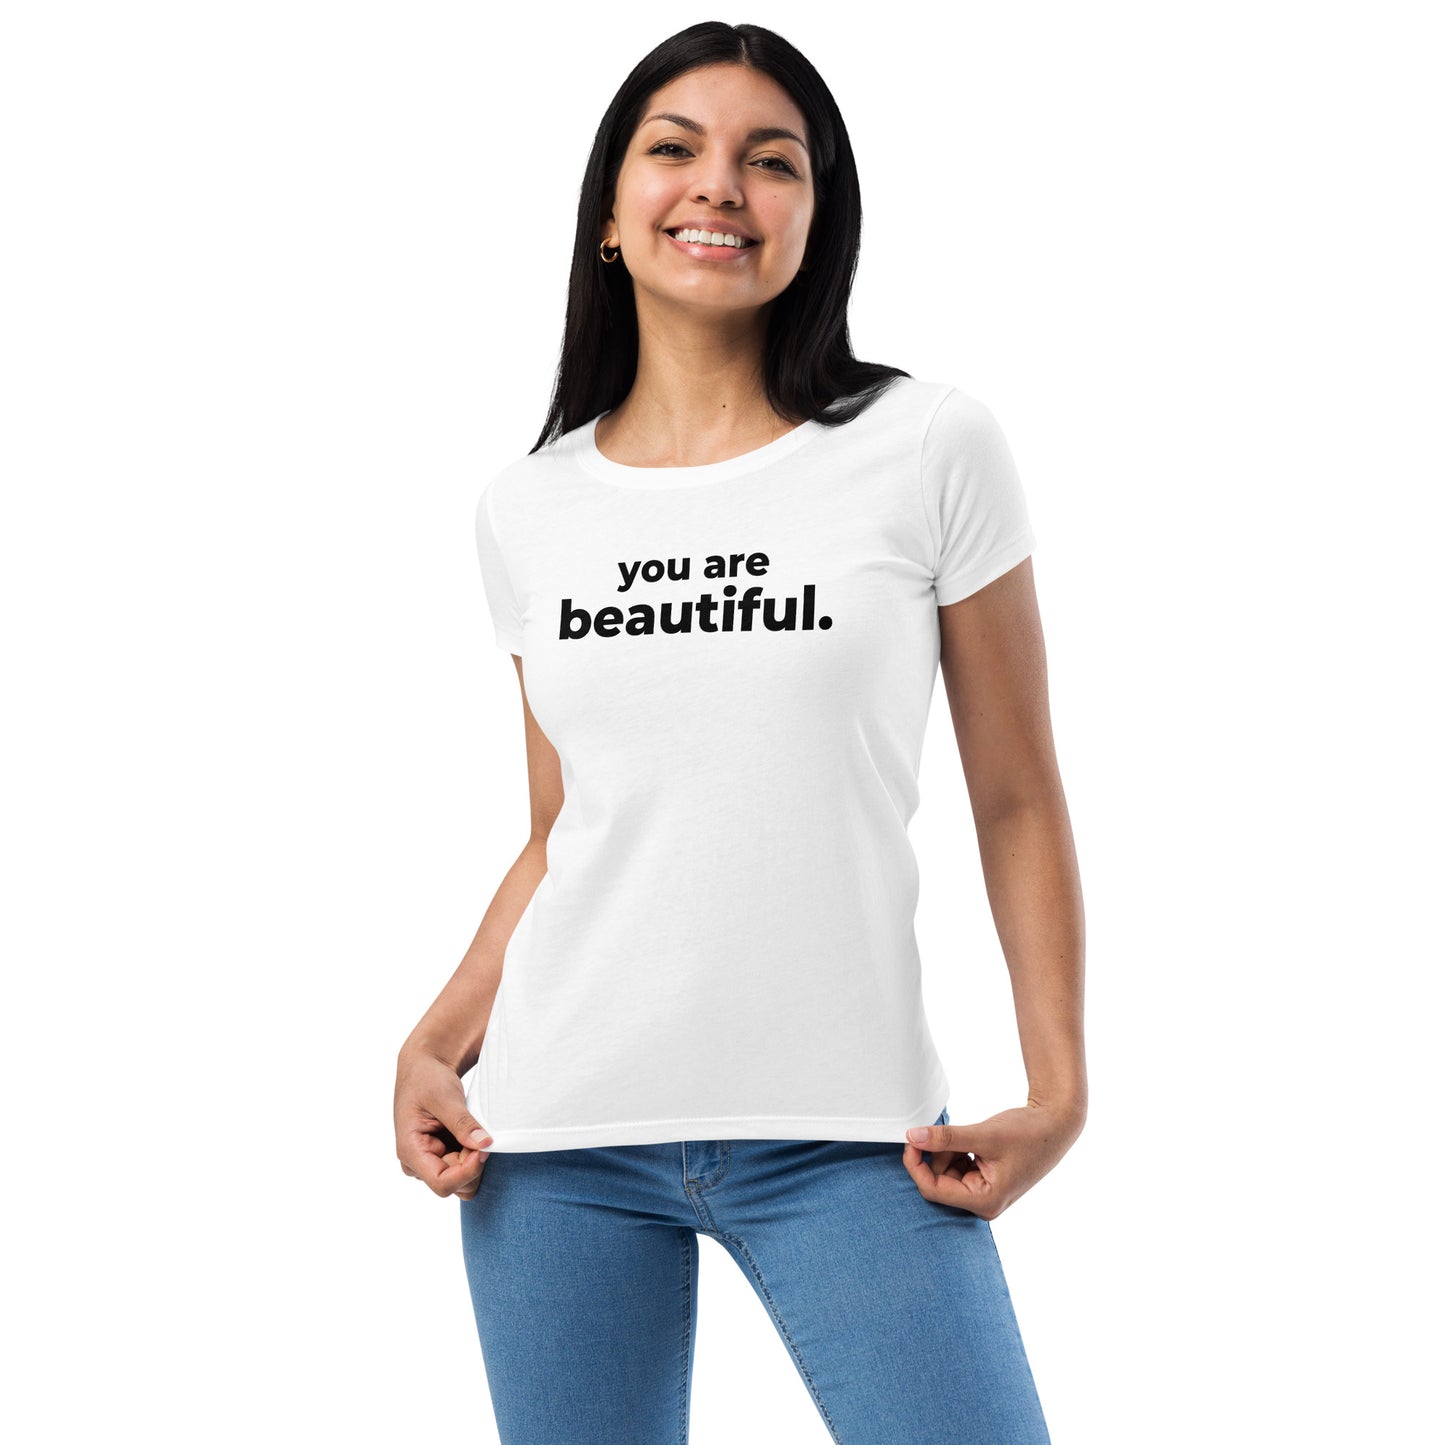 YOU ARE BEAUTIFUL - Women’s fitted t-shirt